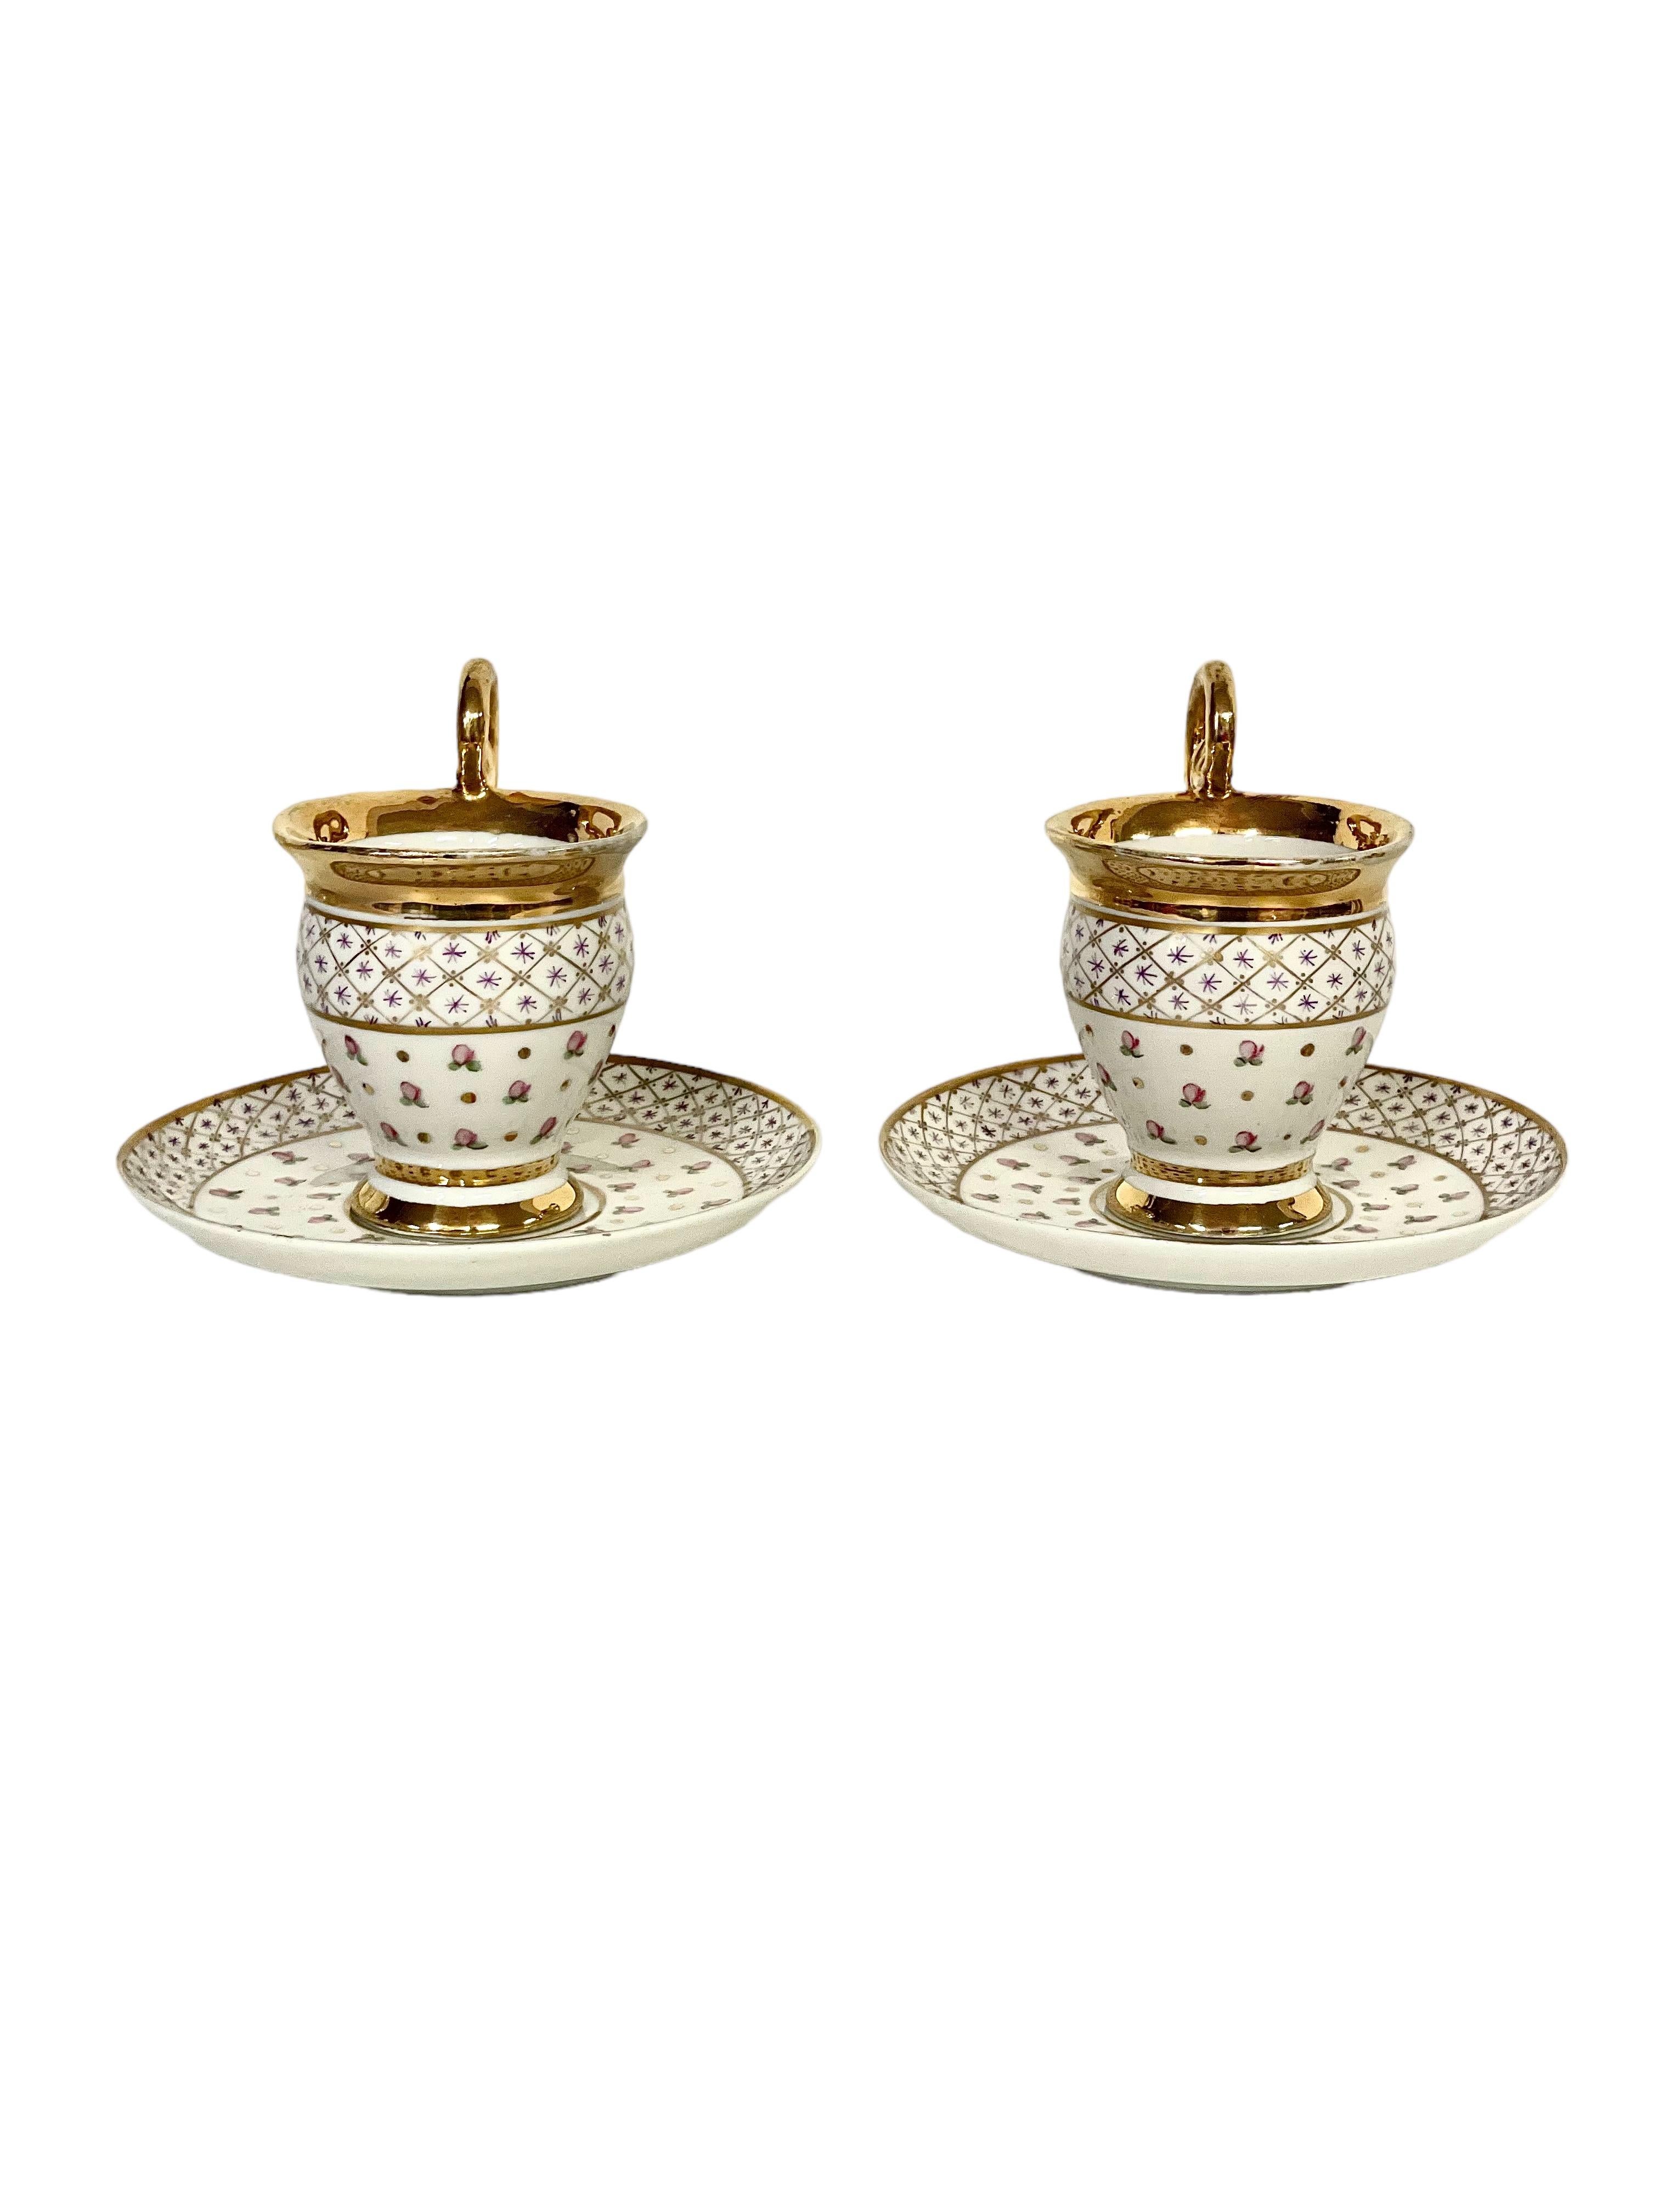 19th Century Antique Pair of Paris Porcelain Gilded Coffee Cups and Saucers For Sale